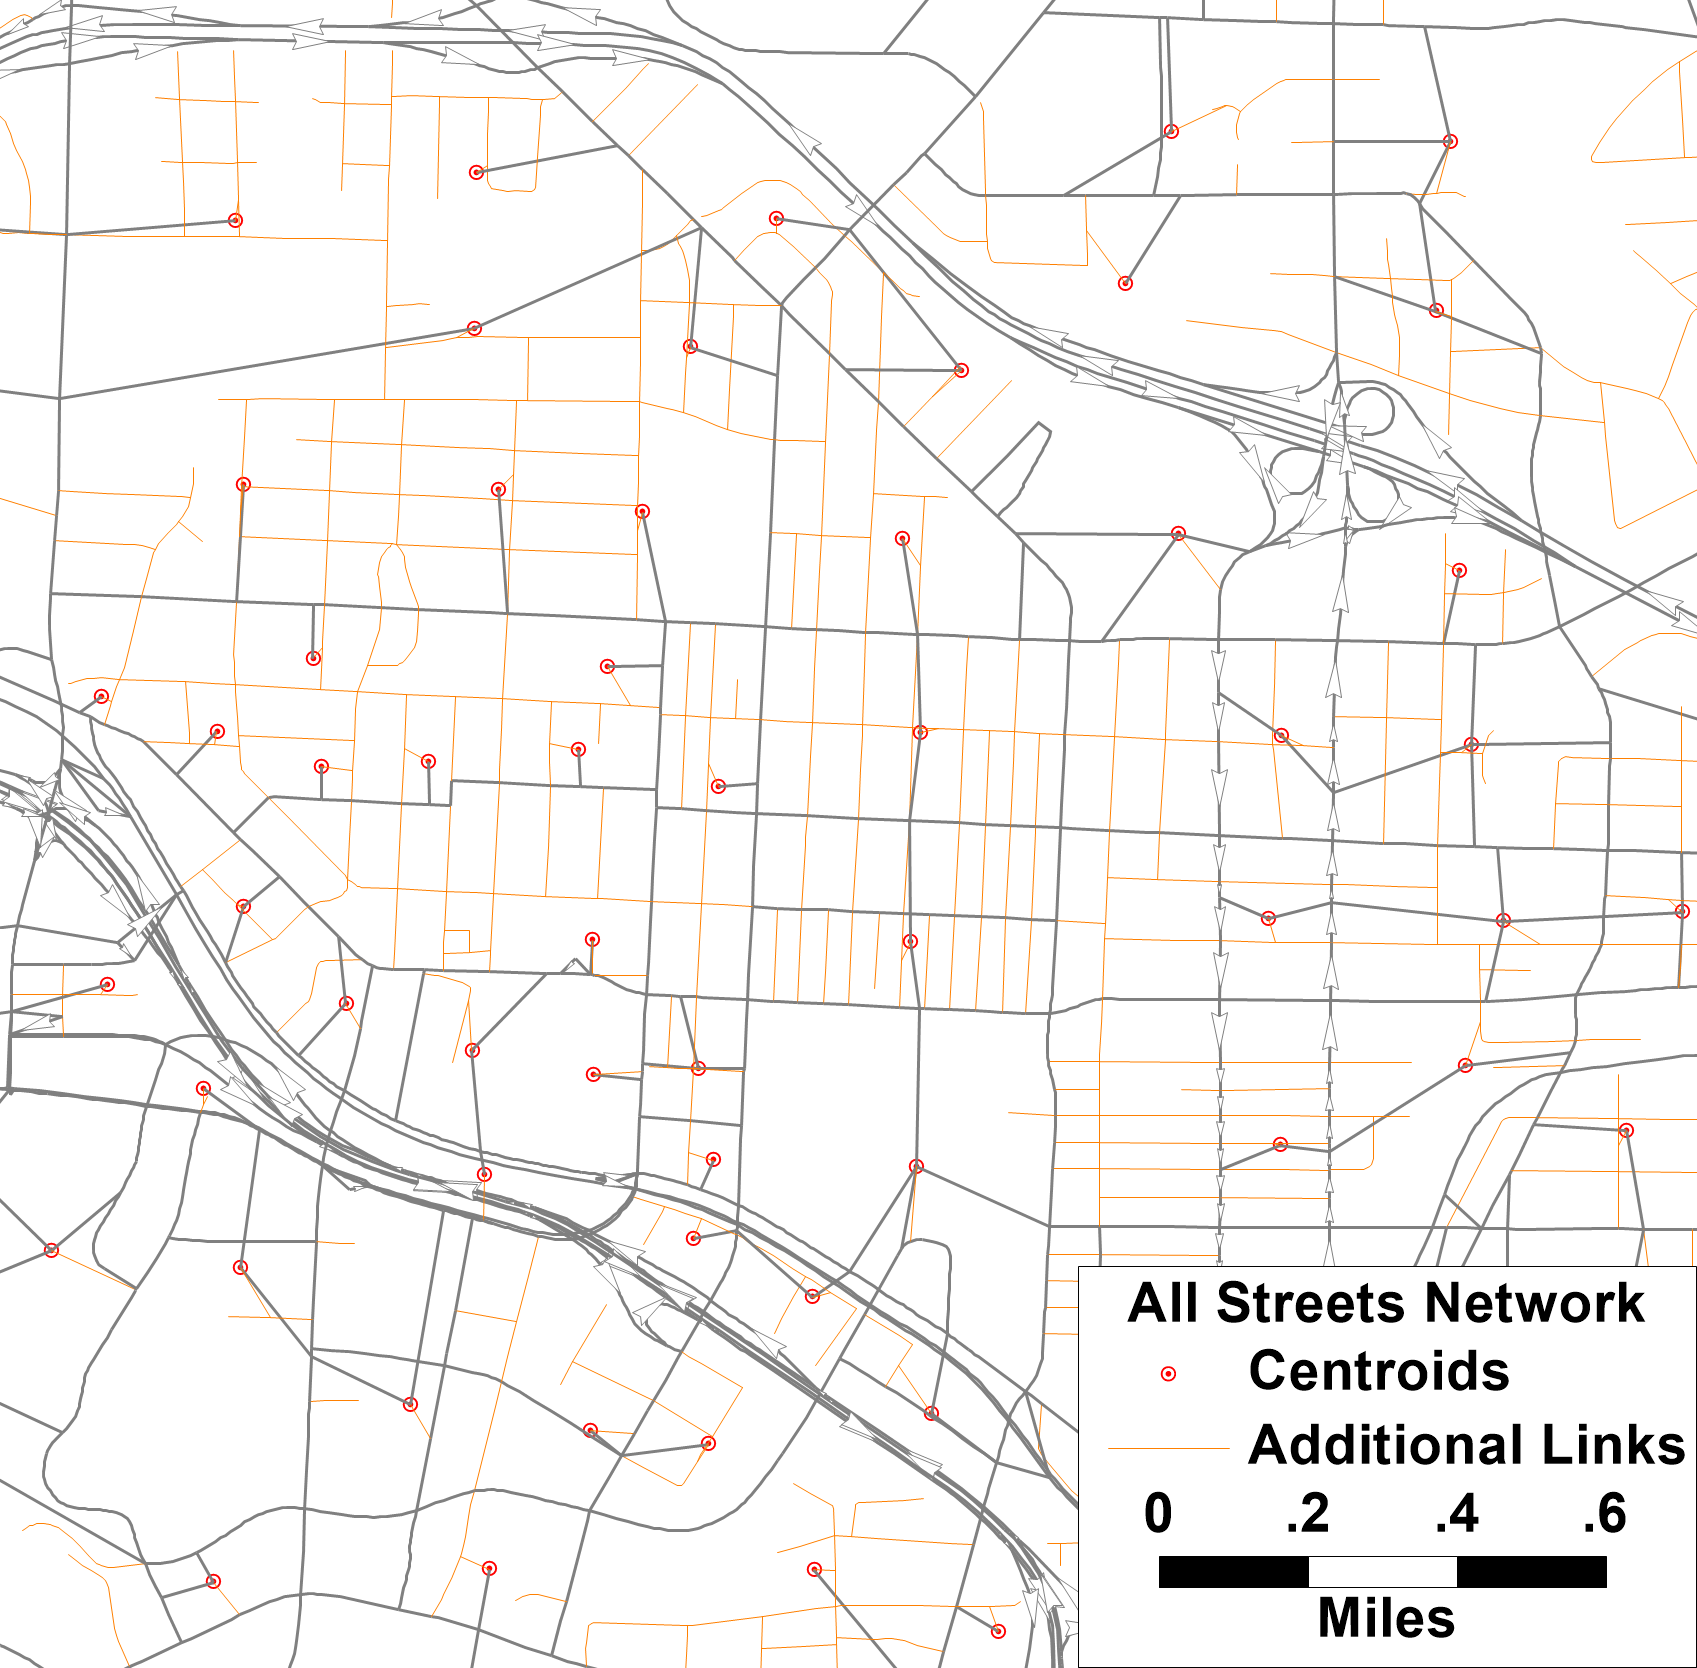 All-Streets Network